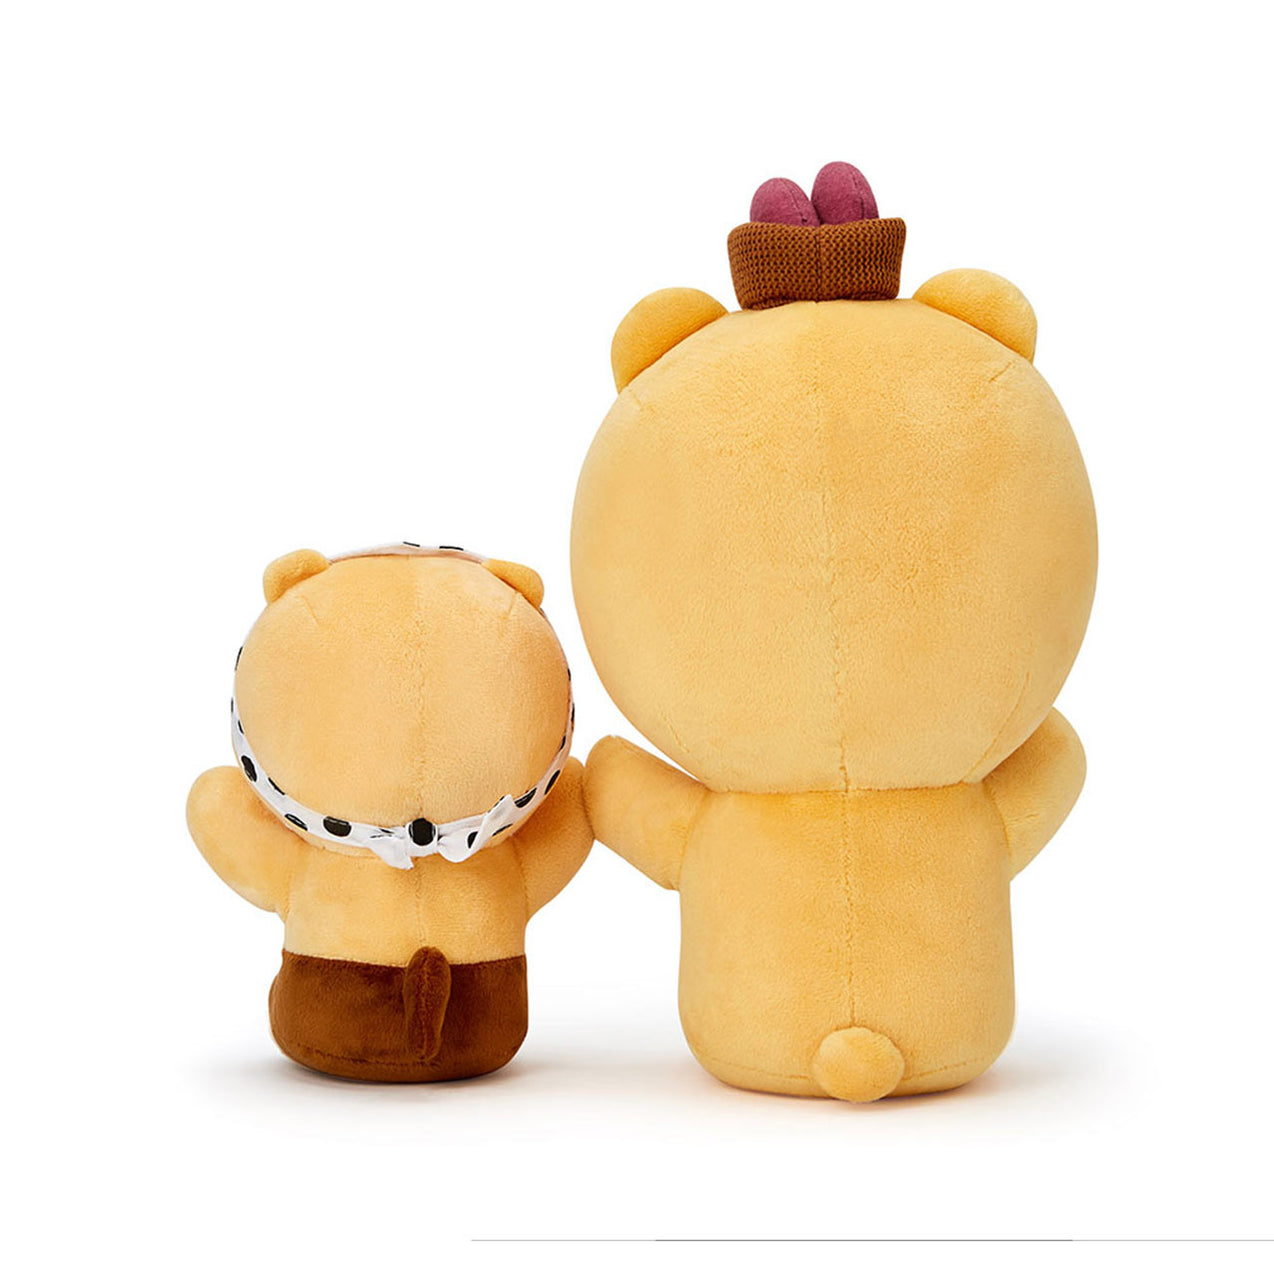 Kakao Friends Plush Toy Play With Ryan And Choonsik Official Md Hiswan 3433